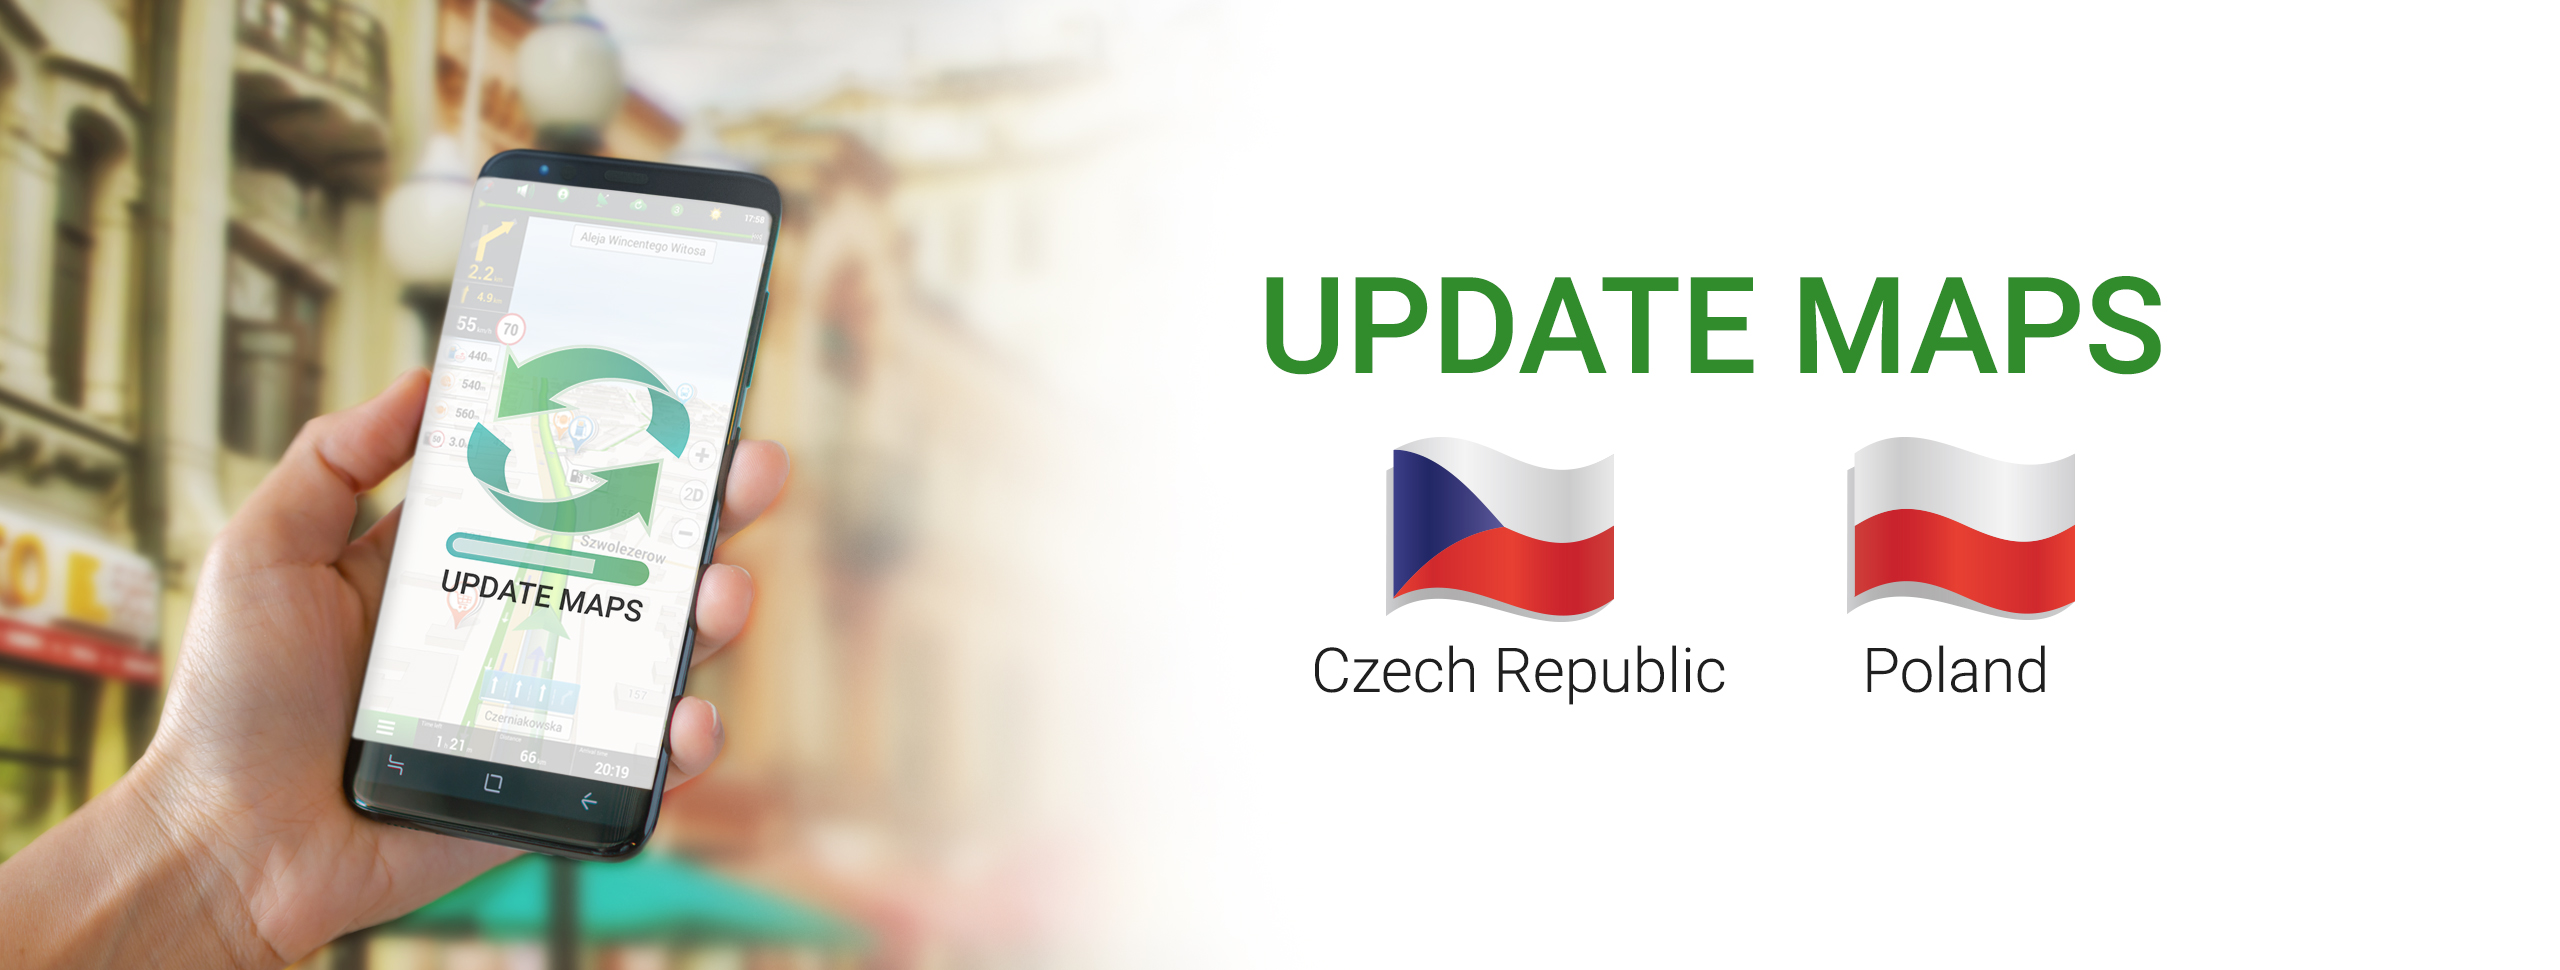 NAVITEL® released an update for maps of Czech Republic and Poland